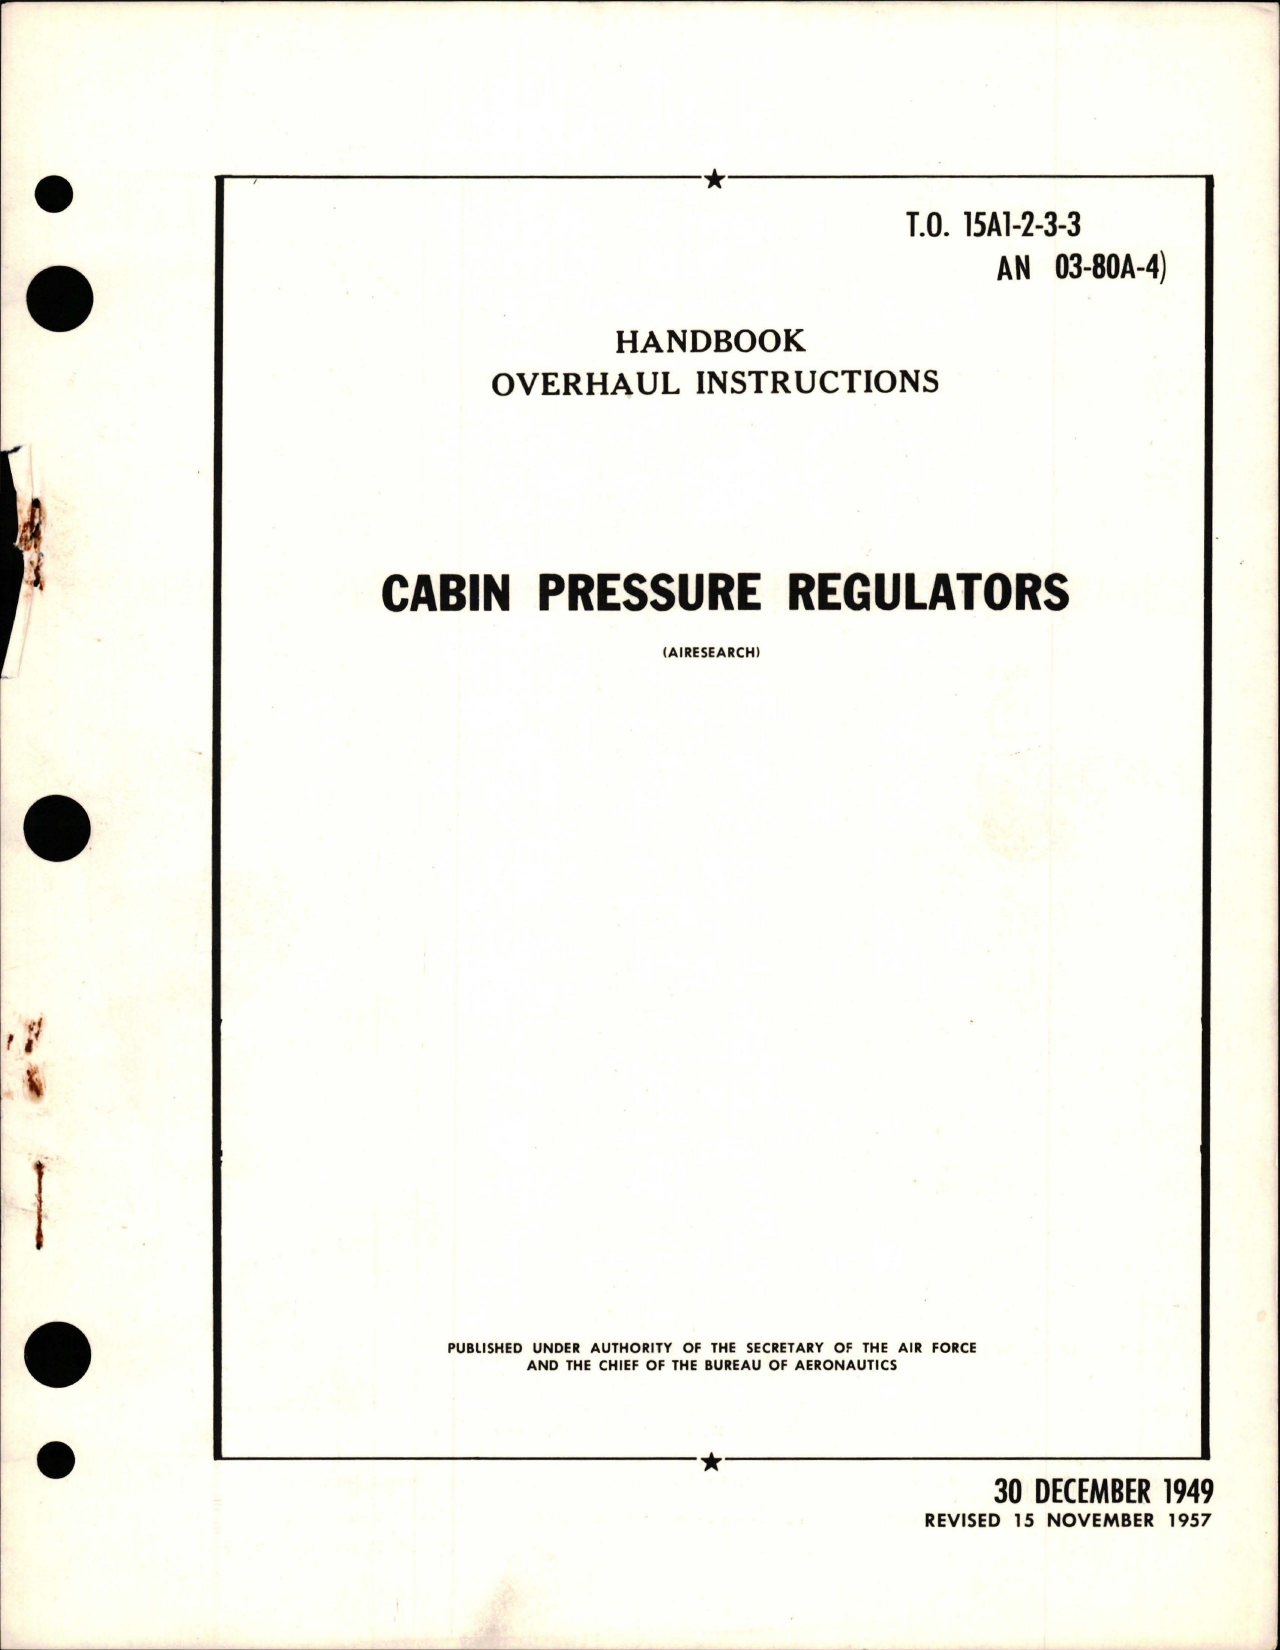 Sample page 1 from AirCorps Library document: Overhaul Instructions for Cabin Pressure Regulators